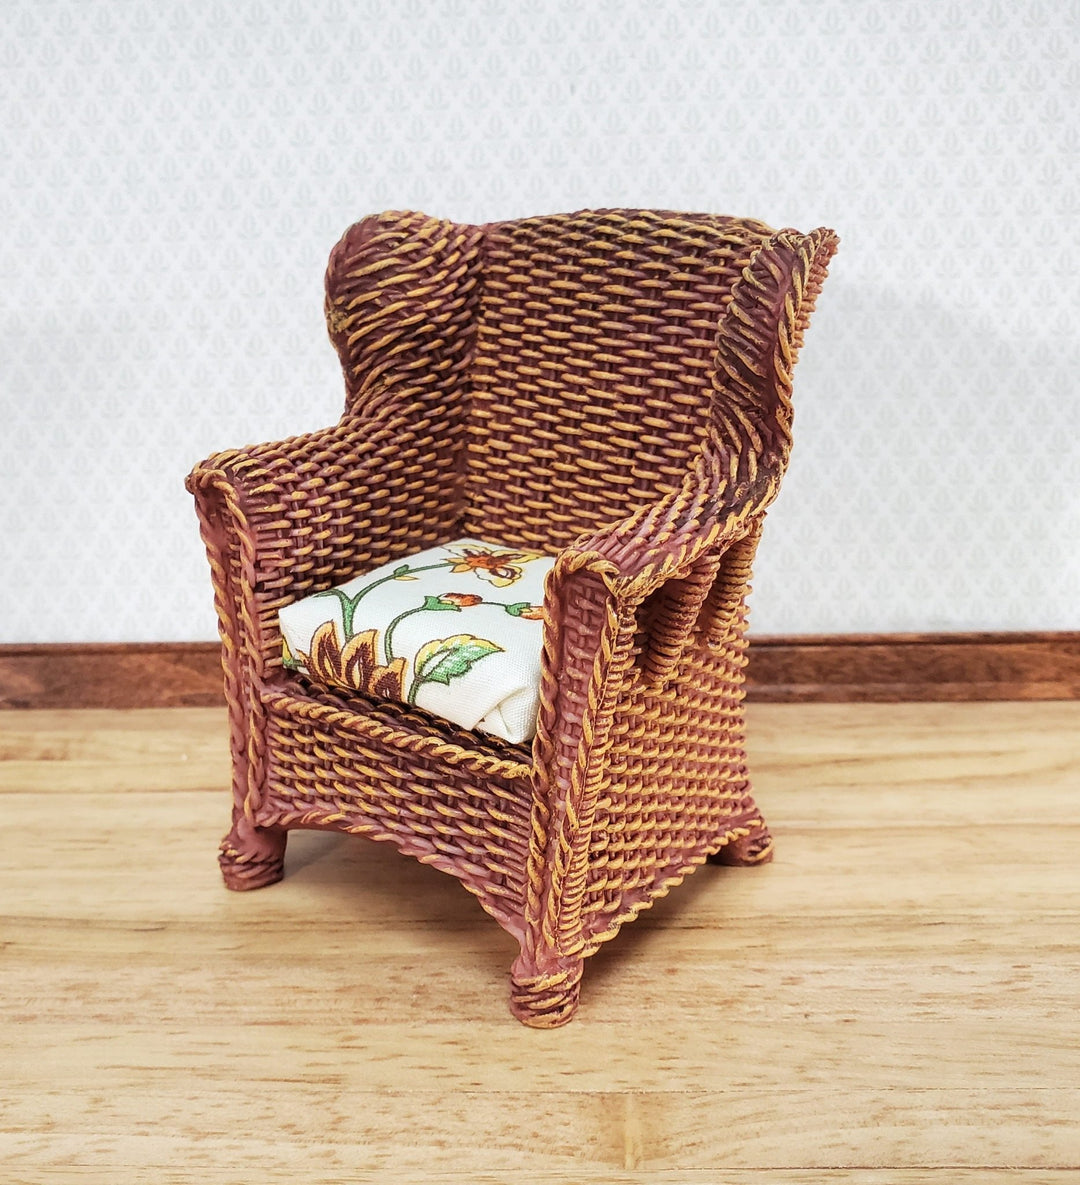 Dollhouse Resin Rattan Wicker Chair with Cushion 1:12 Scale Miniature Furniture by Reutter - Miniature Crush